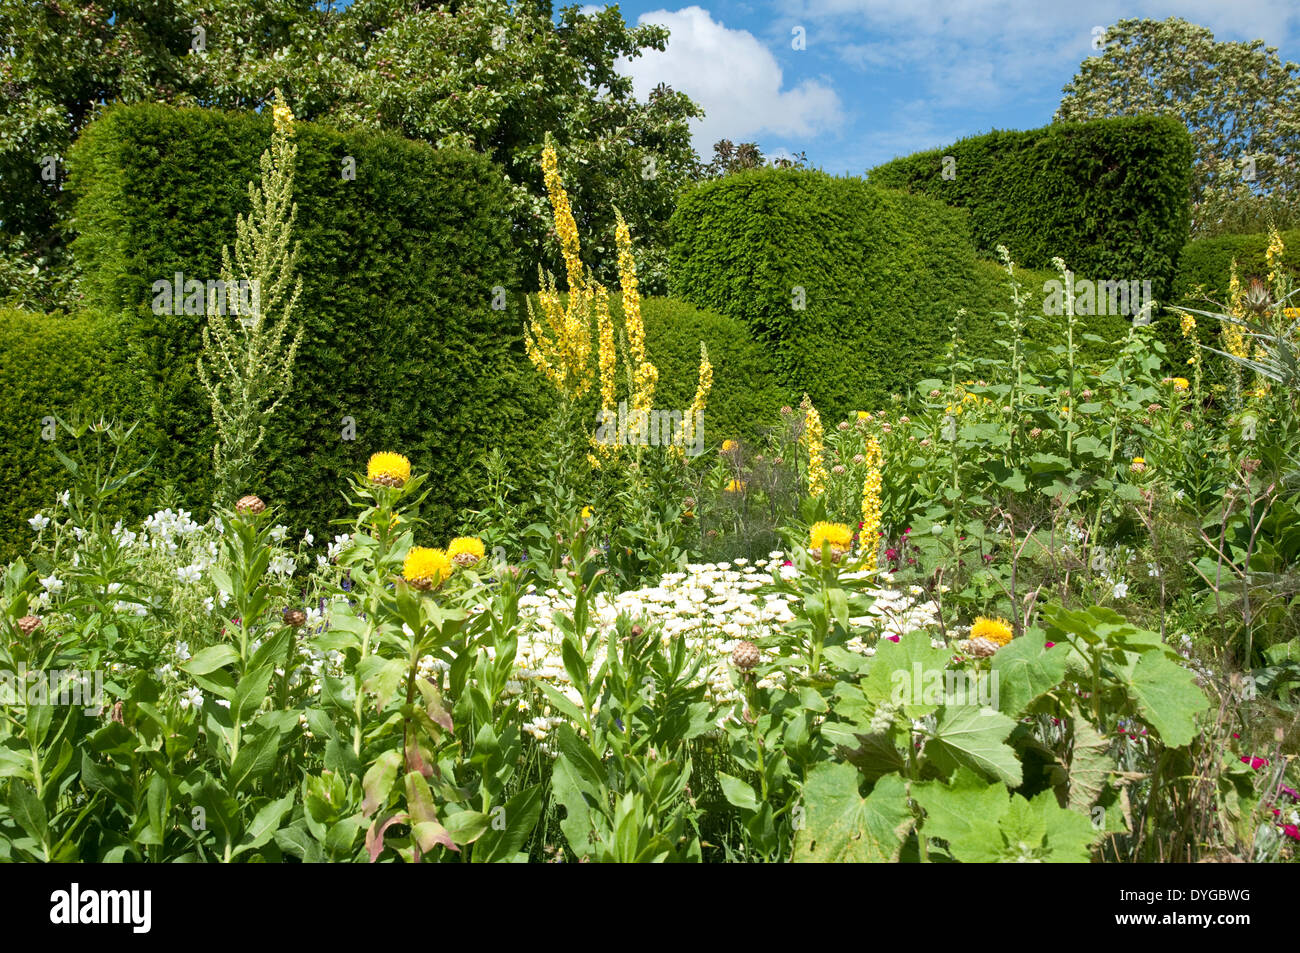 Verbascum olympicum (tall yellow mullein) with Yellow Thistles, shown against topiary yew hedging at Great Dixter, Sussex, UK. Stock Photo